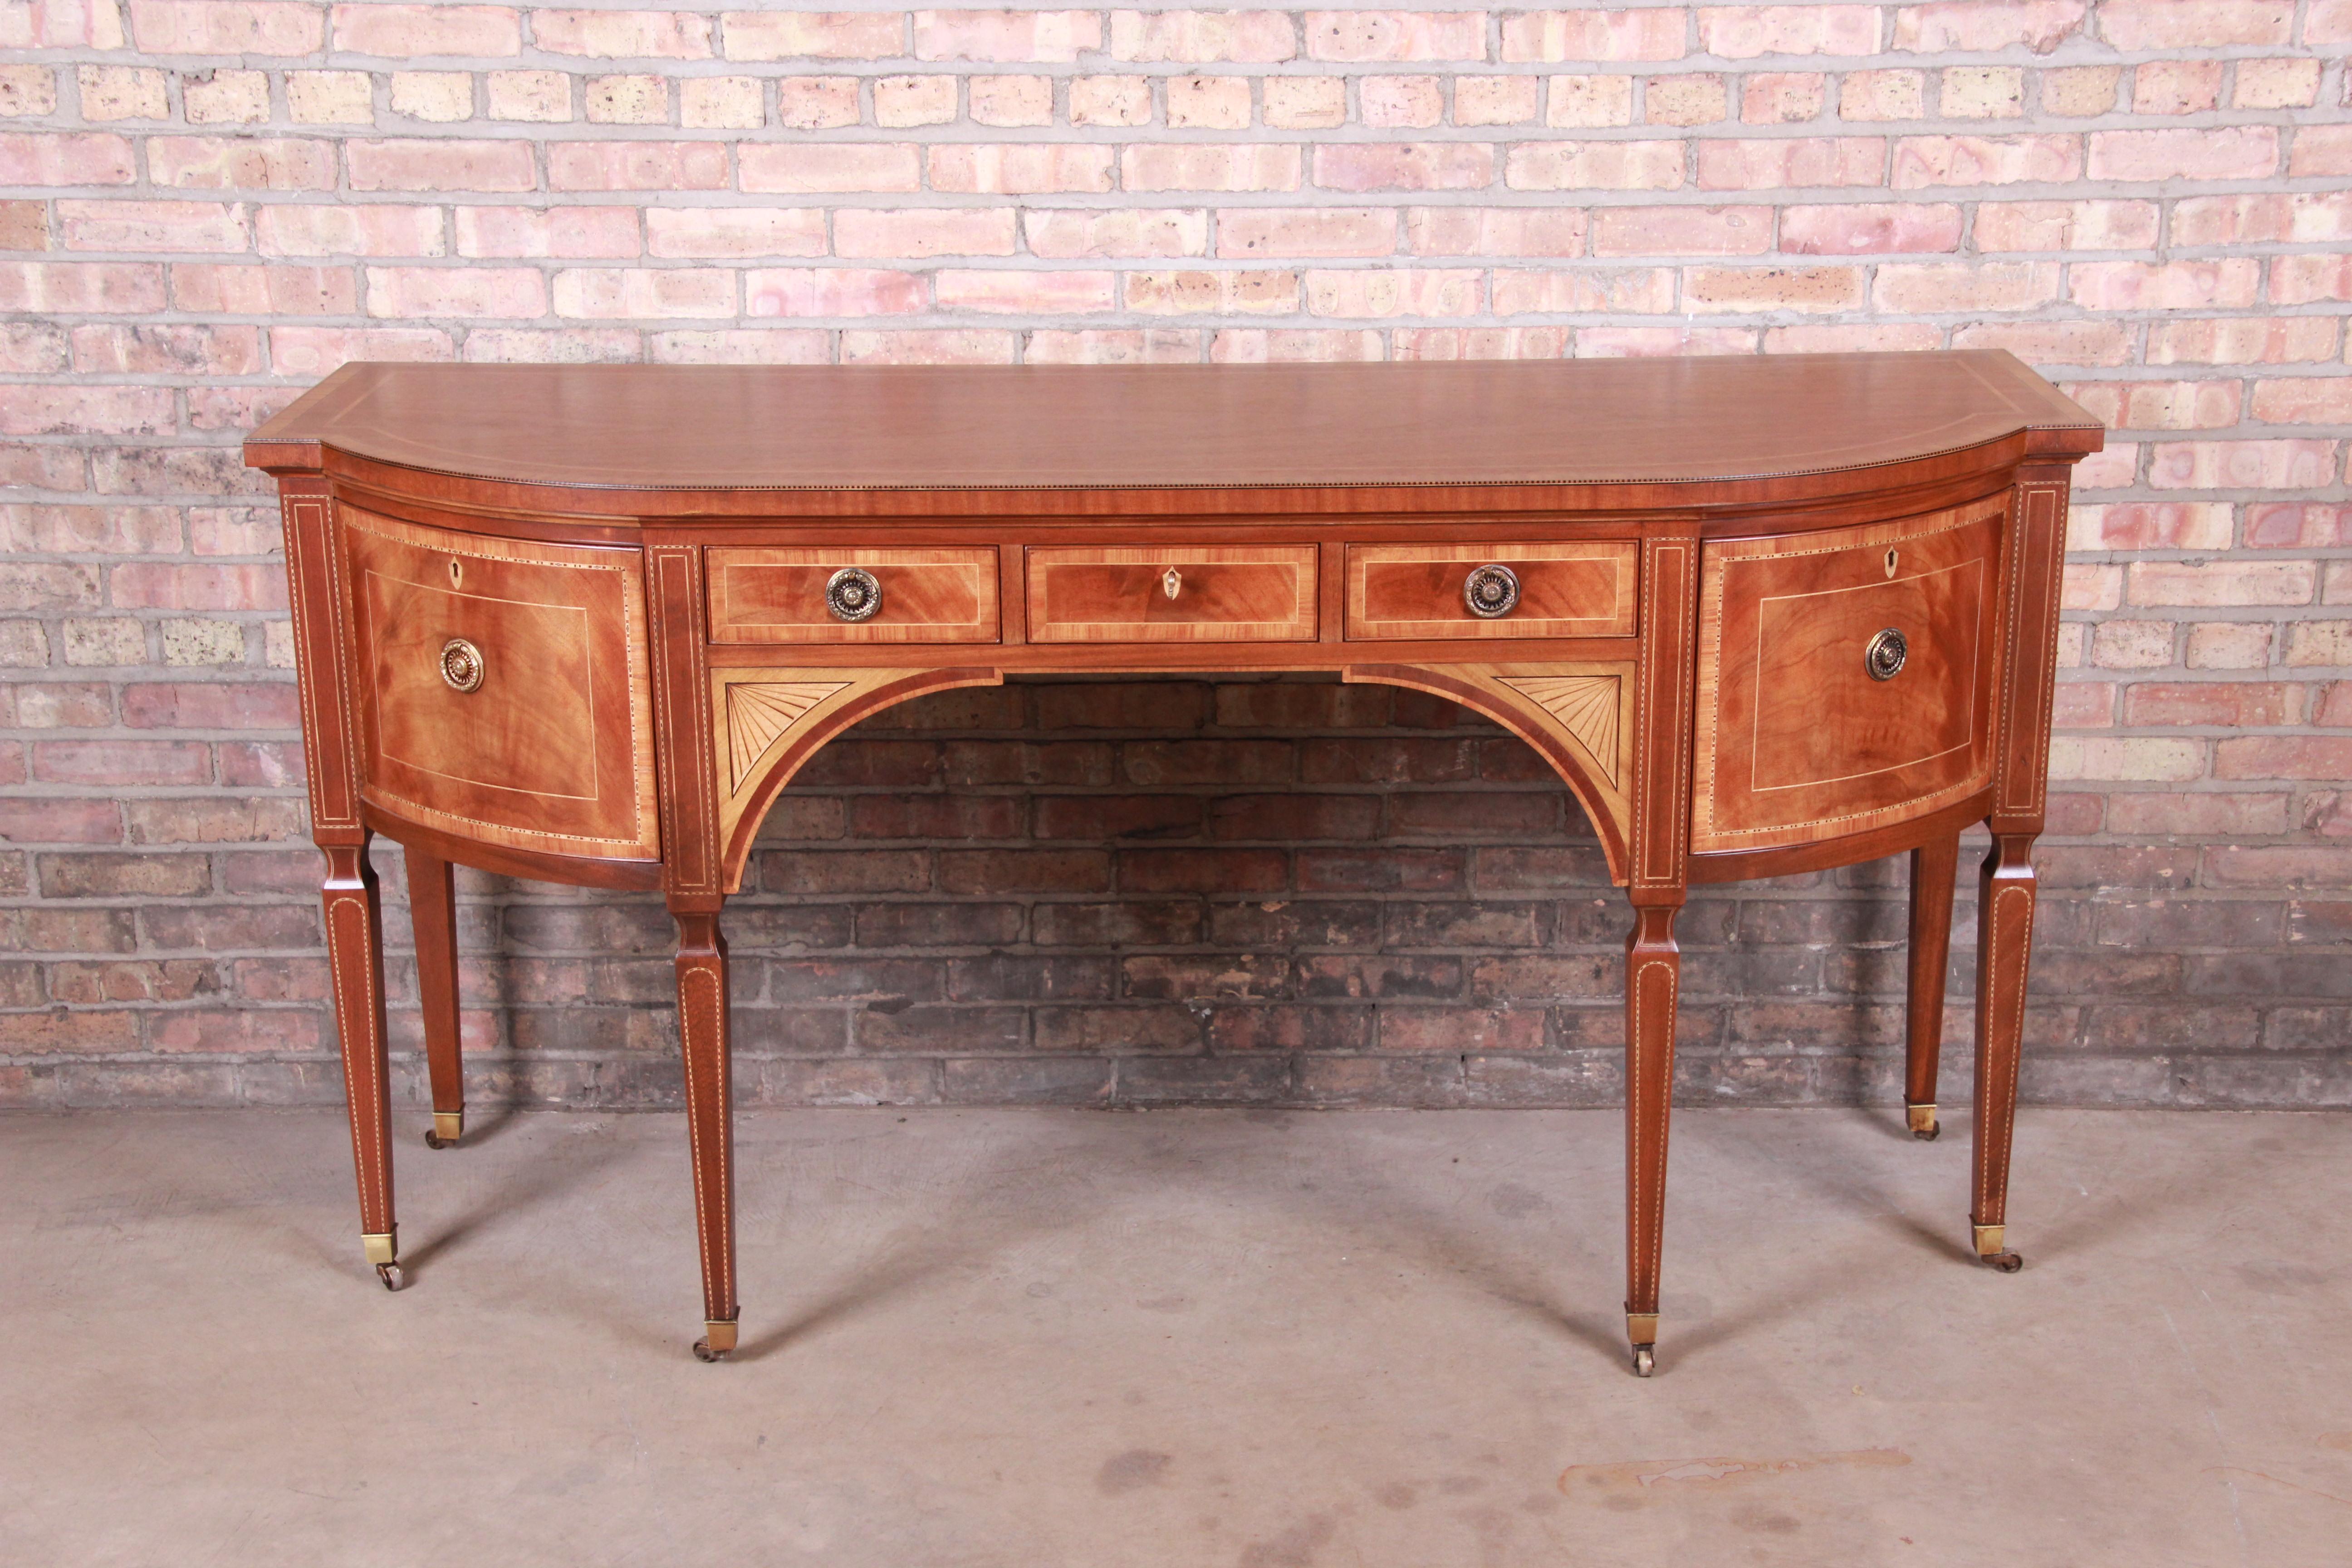 A truly rare and exceptional Sheraton bow-fronted mahogany sideboard from the exclusive Stately Homes Collection by Baker Furniture.

The sideboard is crossbanded with satinwood and tulipwood and inlaid with chequer pattern bands and stringing and